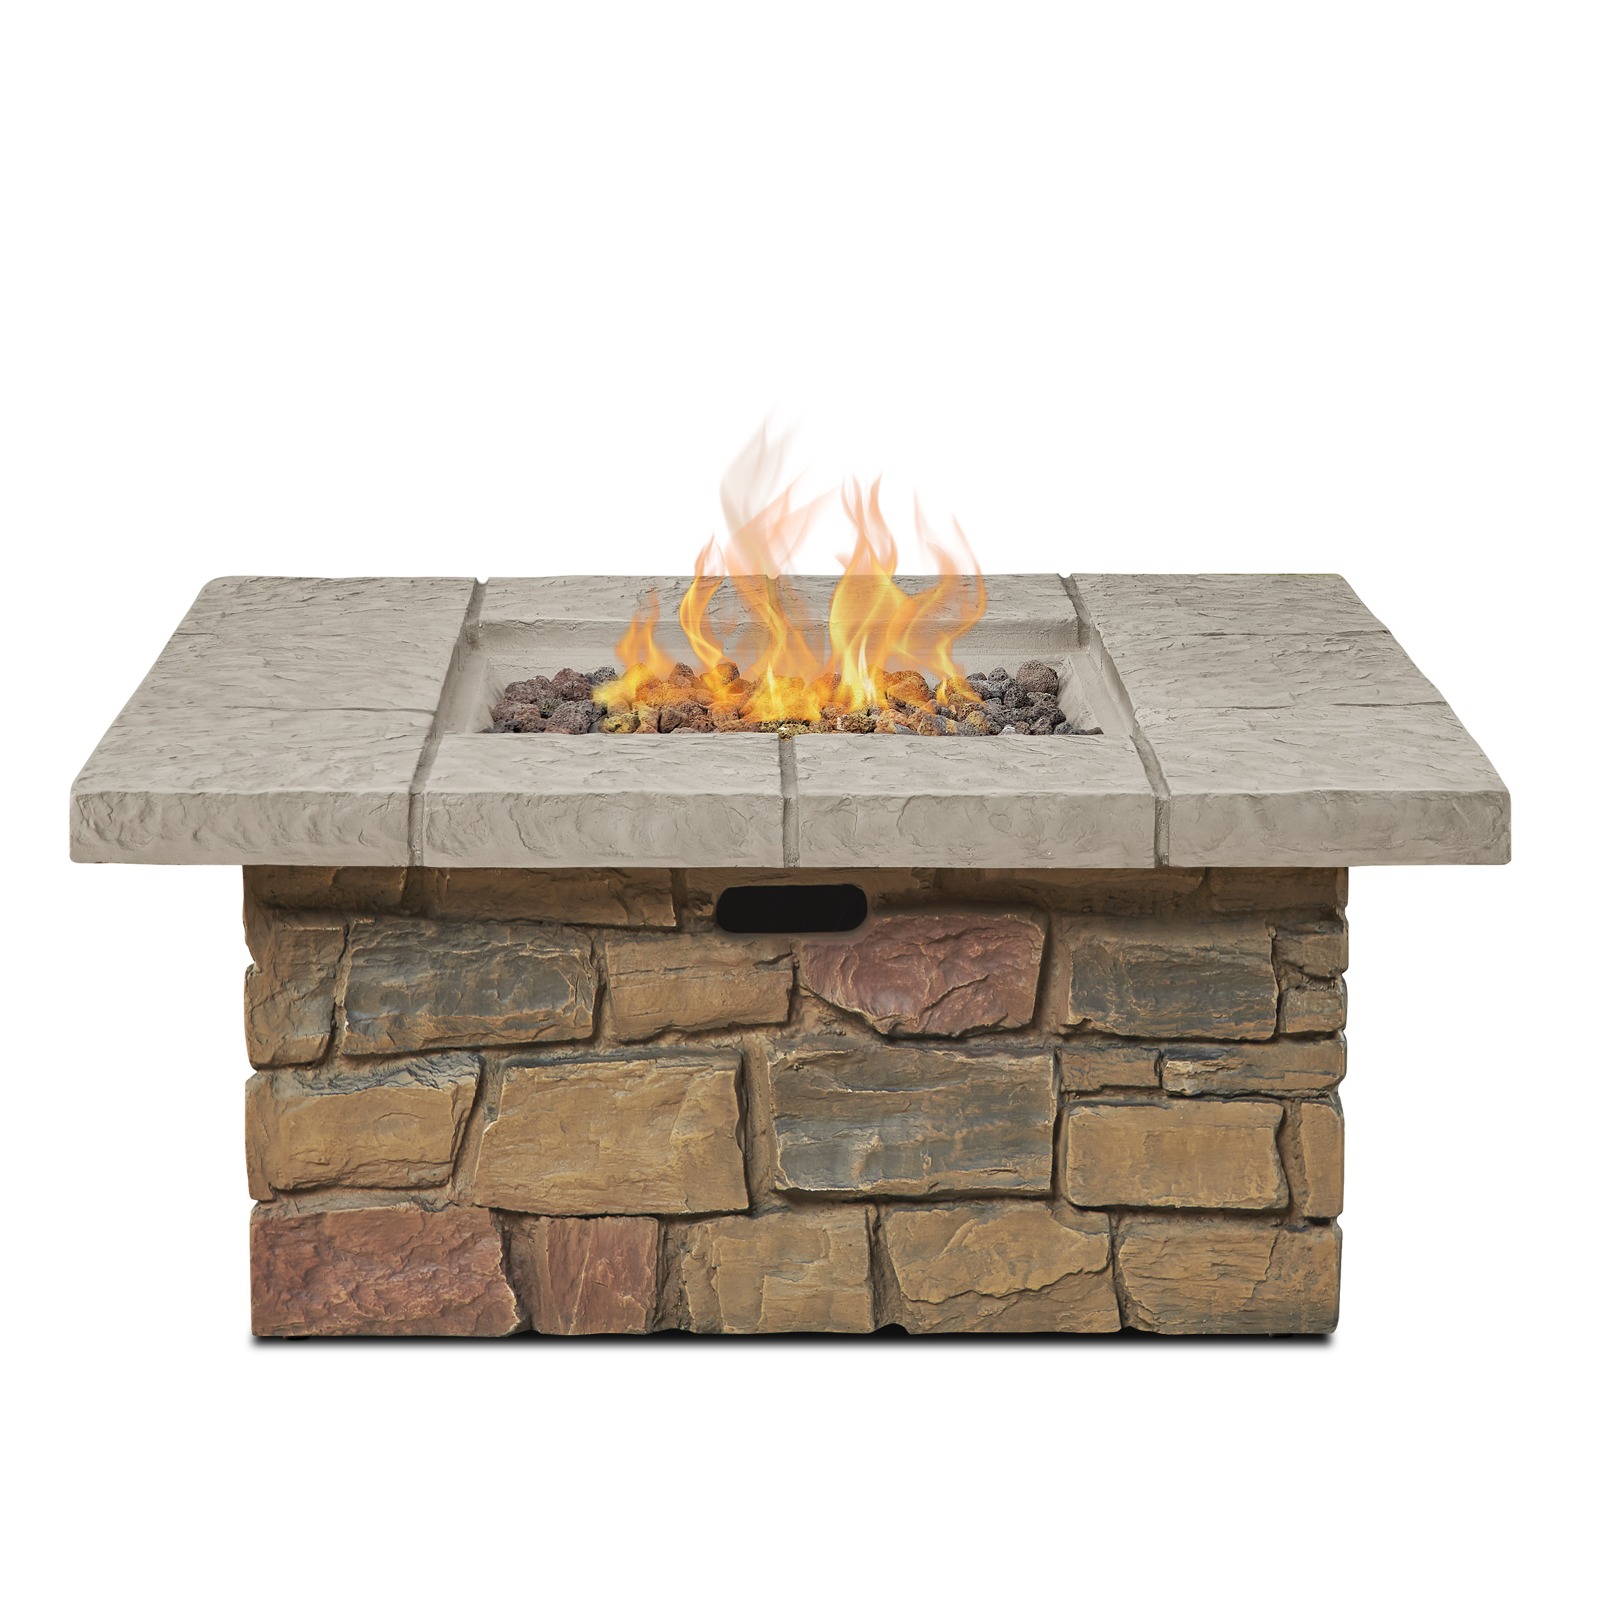 Sedona Square Propane Fire Table with NG Conversion Kit in buff on white